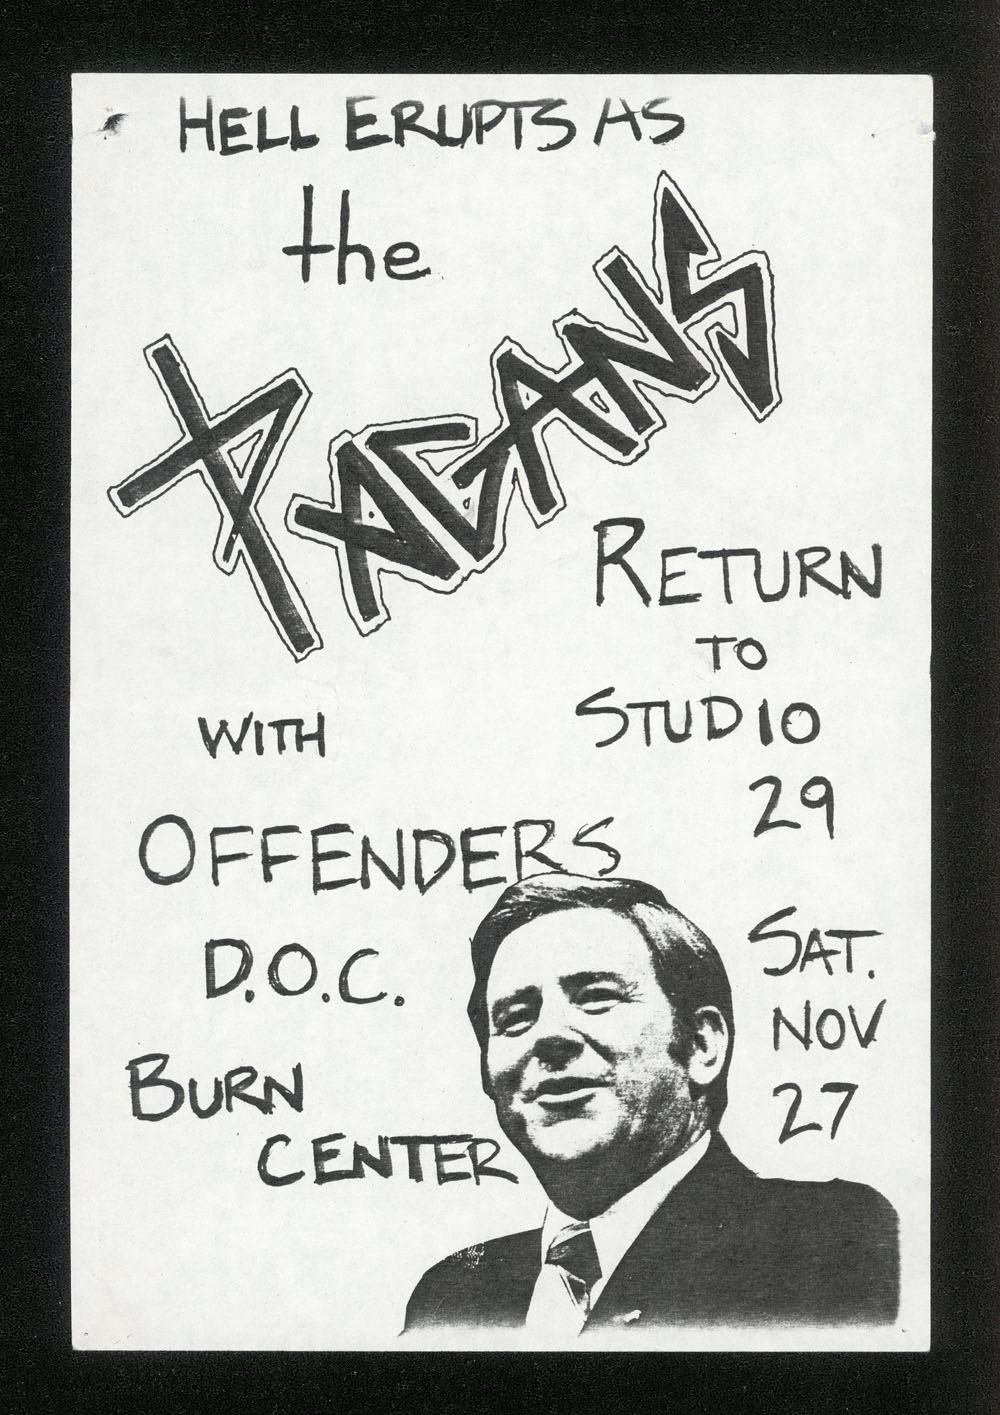 PAGANS w/ Offenders, D.O.C., Burn Center at Studio 29